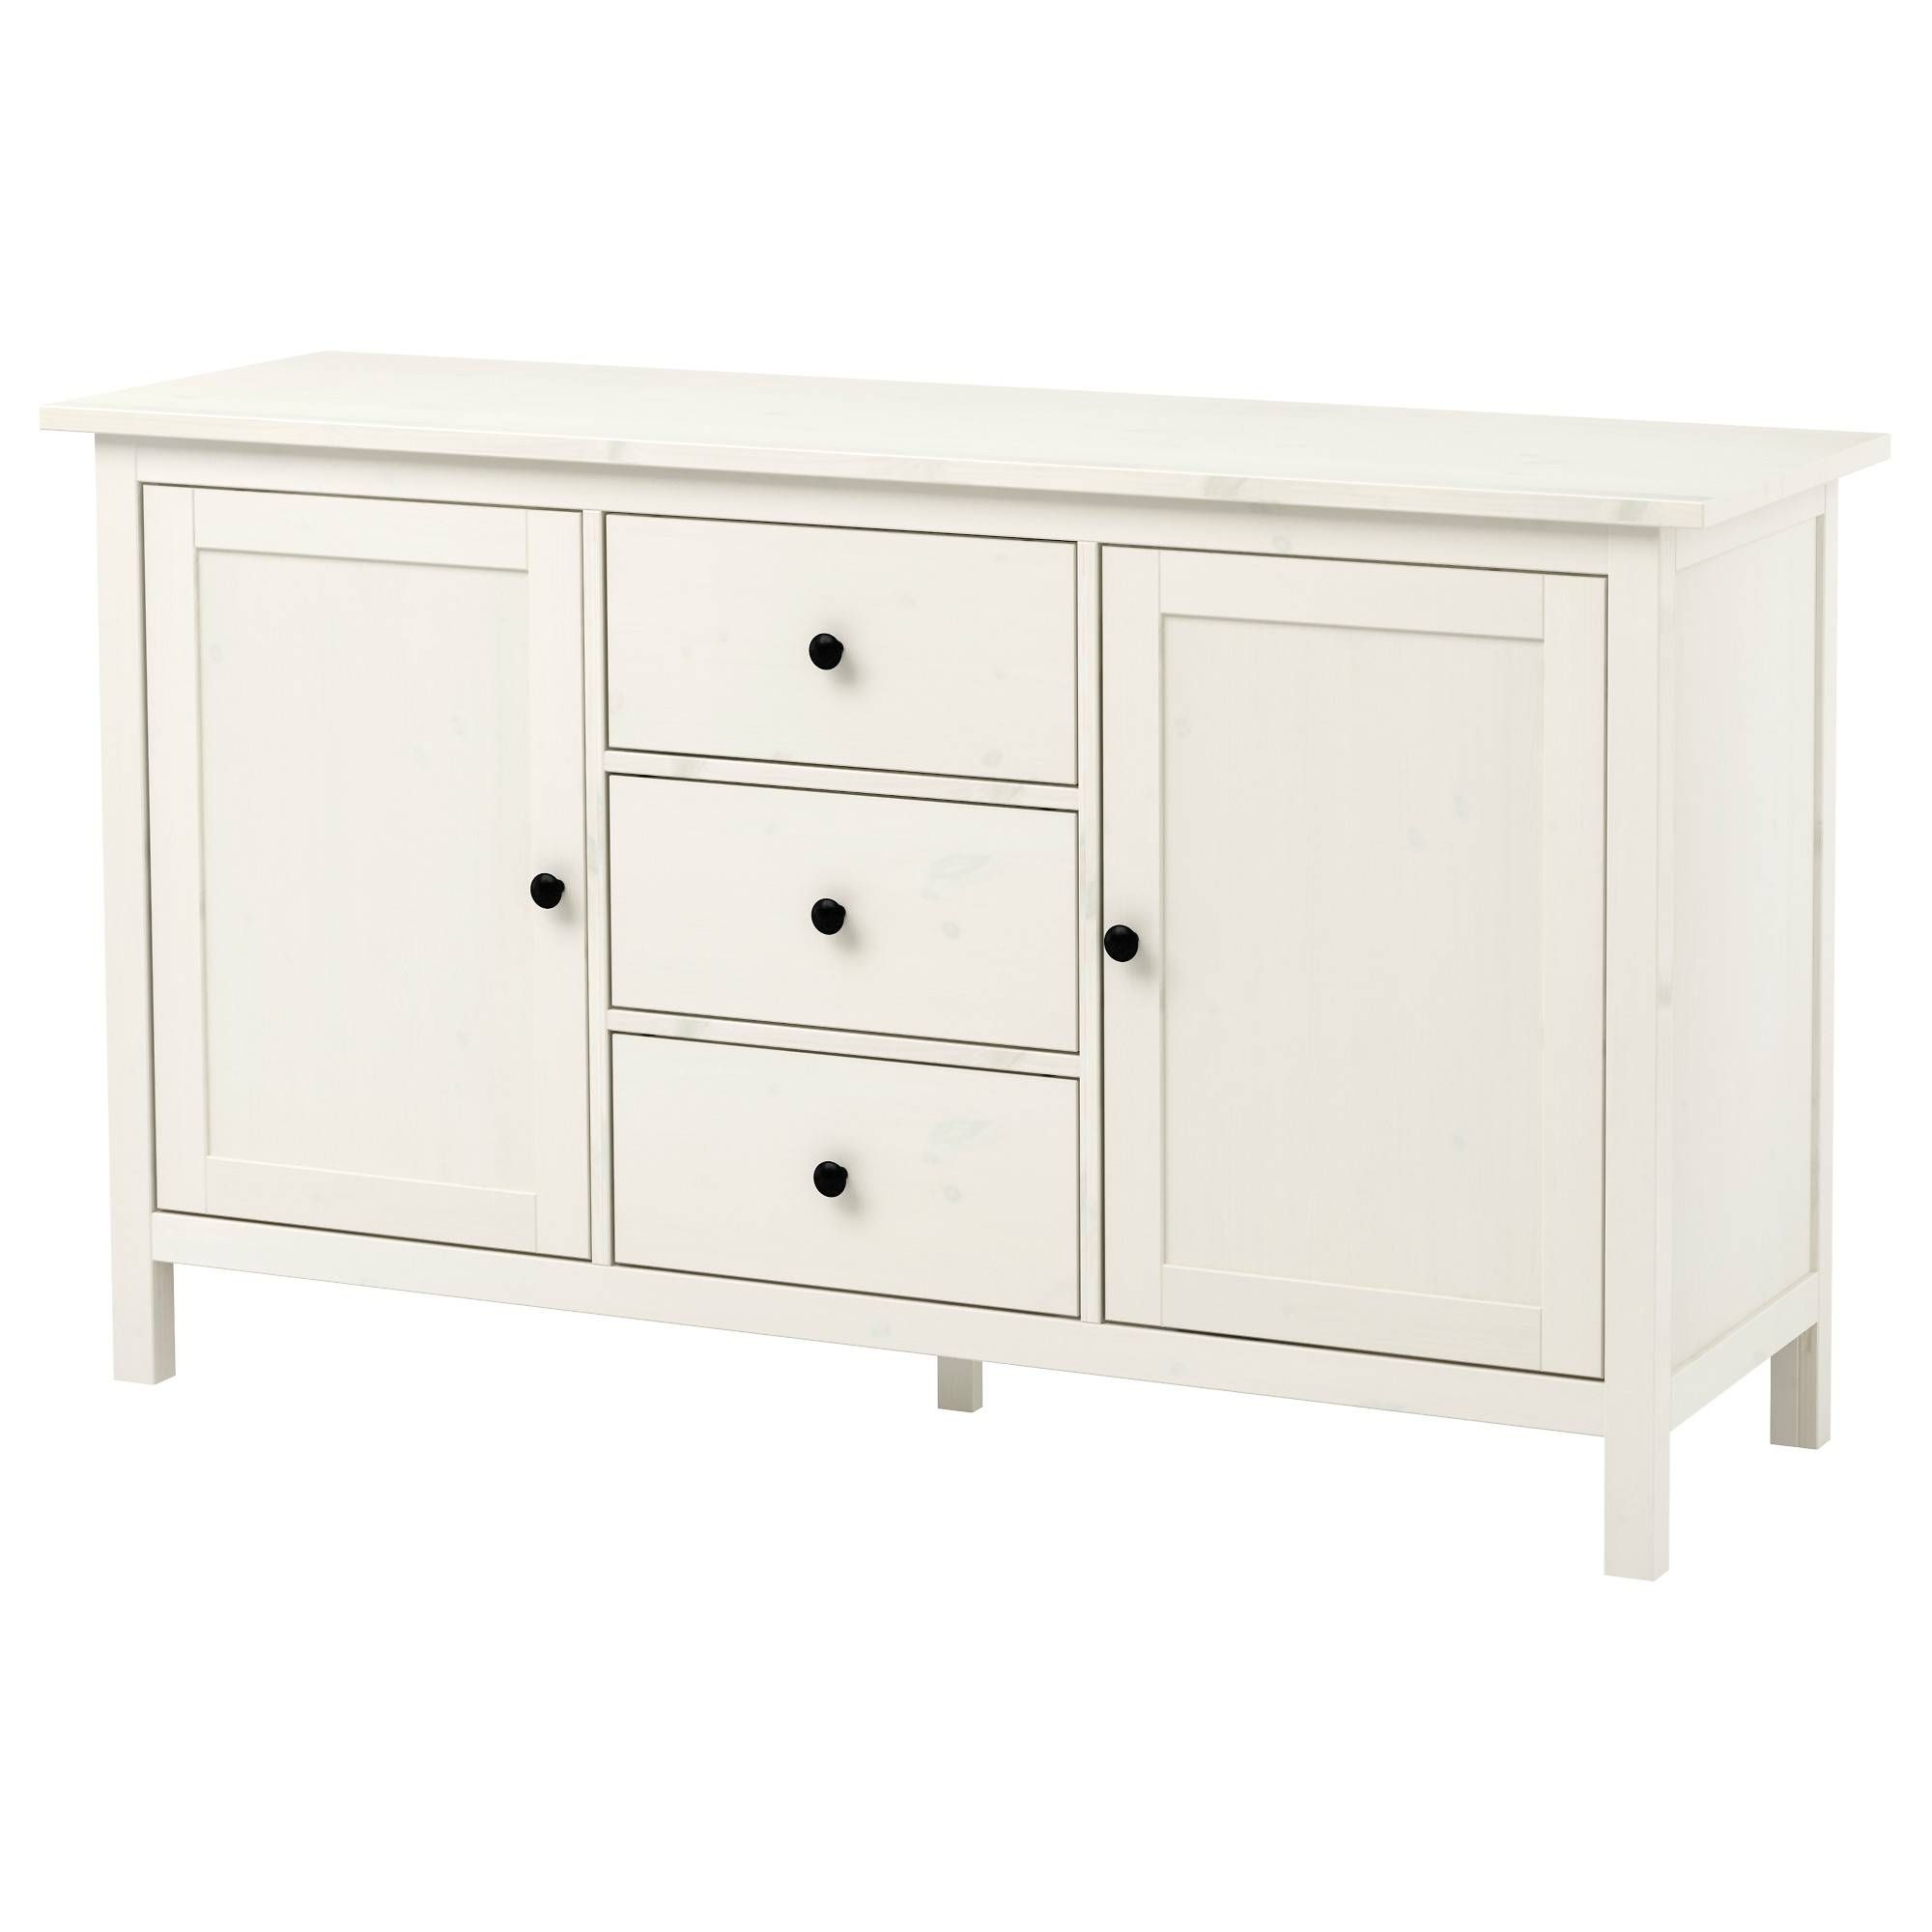 Sideboards & Buffet Cabinets | Ikea Throughout Small White Sideboard (View 7 of 20)